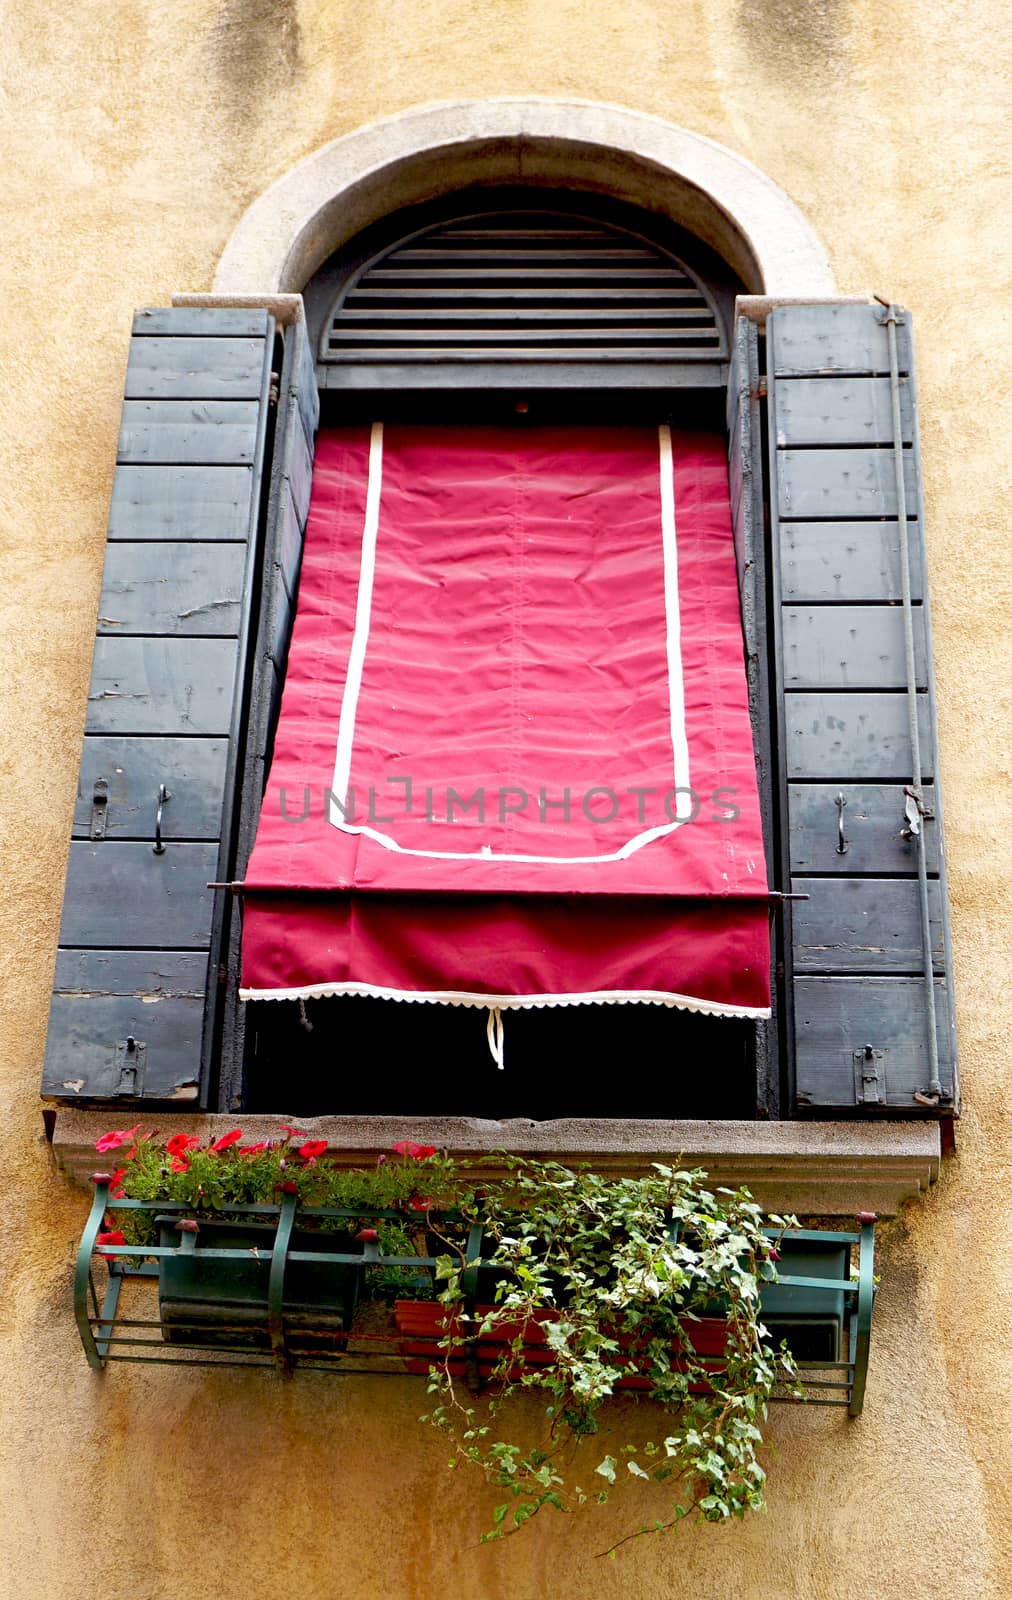 Window, red canopy and old wall building architecture, Venice, Italy